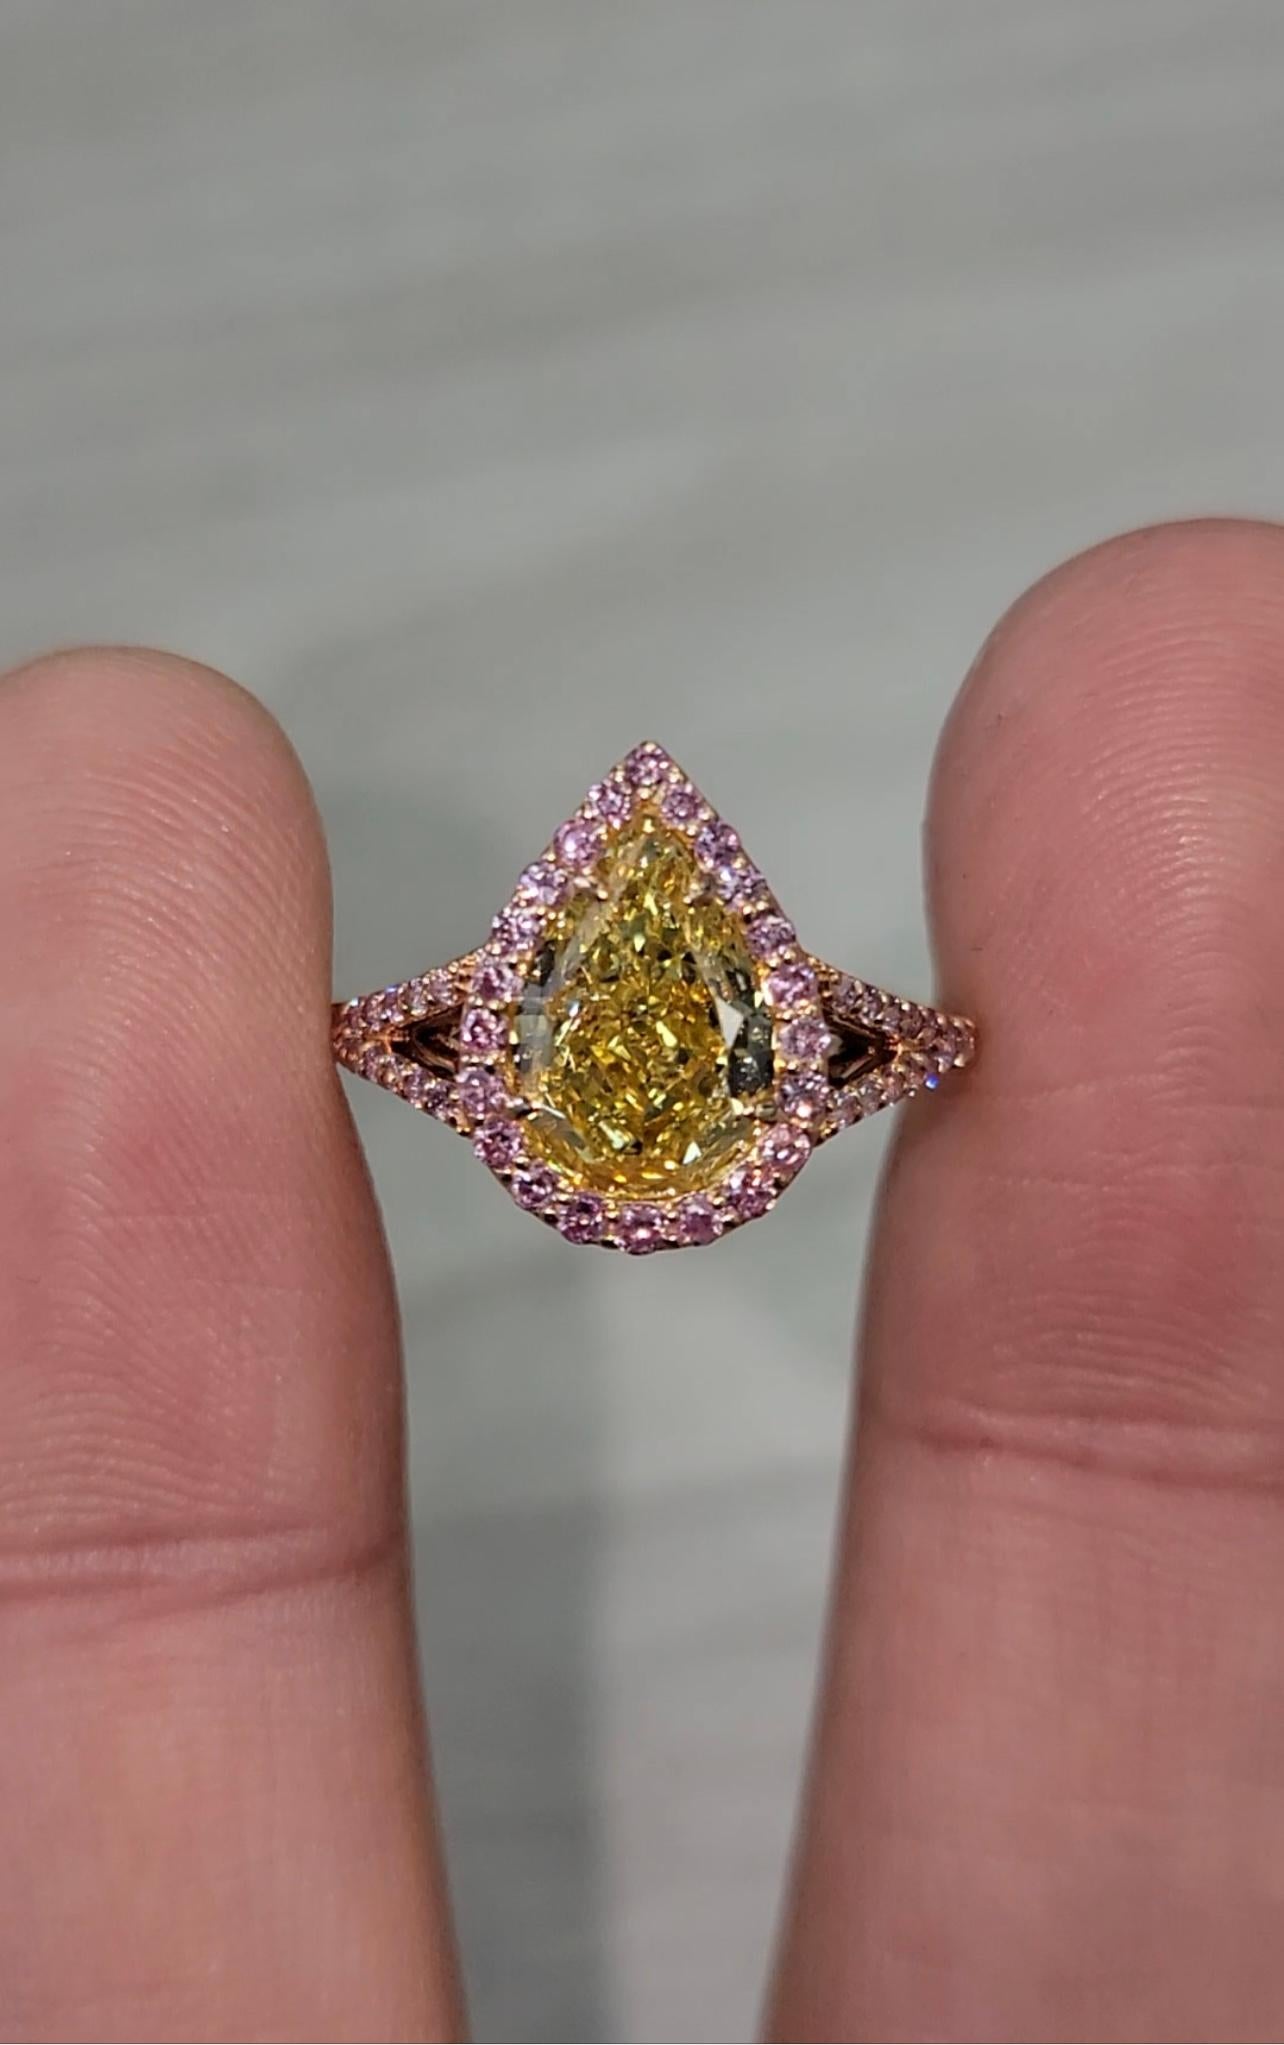 2.33ct GIA Pear Shape
I1 clarity (completely eye clean)
Very Saturated Color
Surrounded by fancy pink round diamonds weighing 0.47cts
Set in 18k rose gold